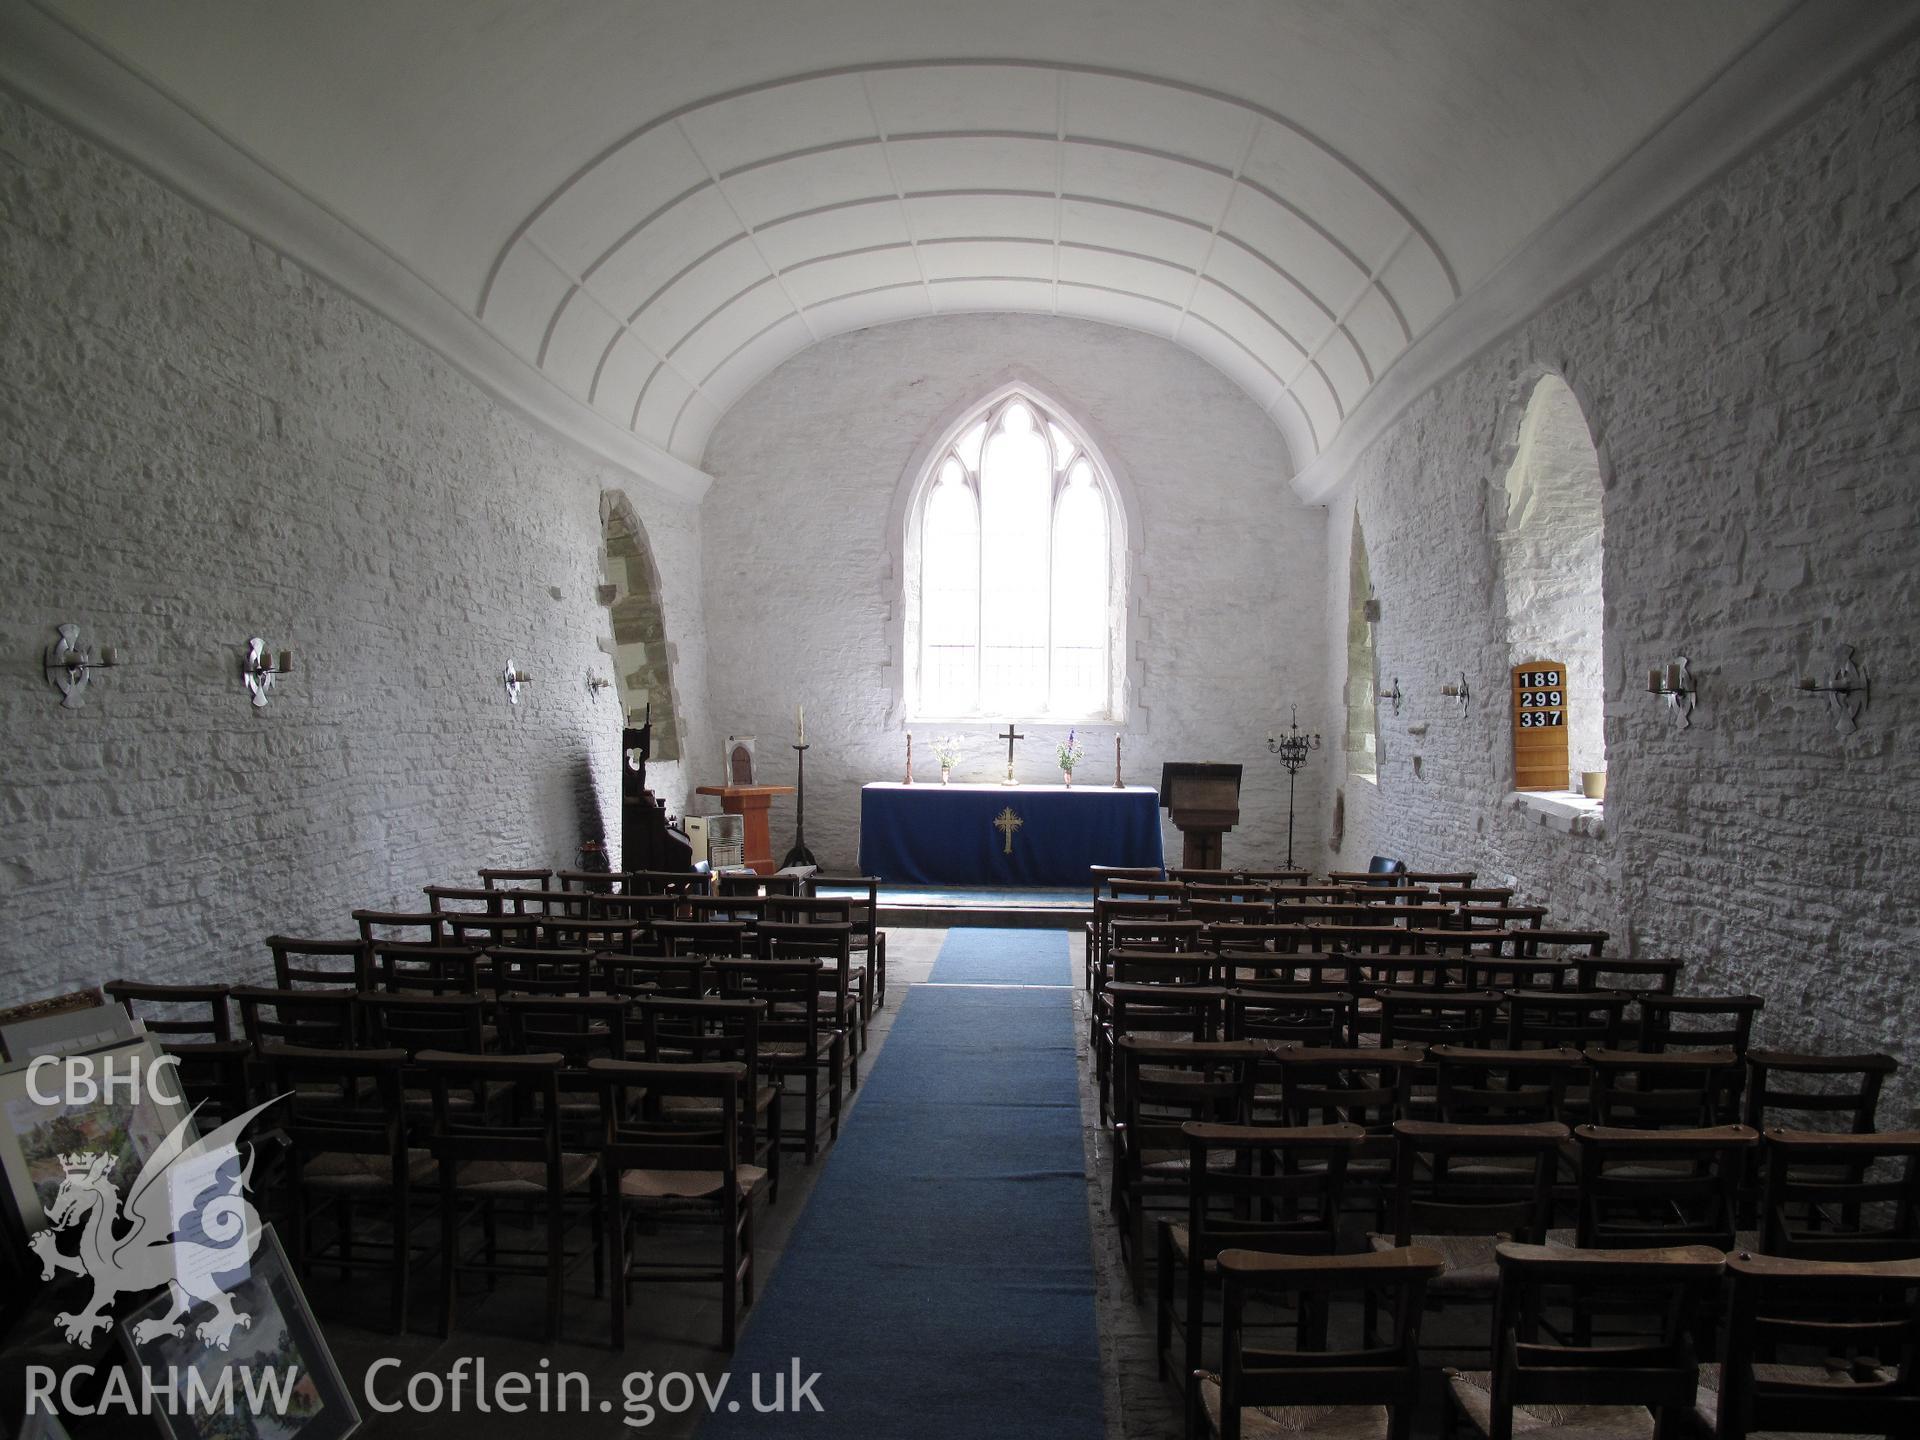 View of the nave of St Mary's Church, Pilleth, looking towards the altar.